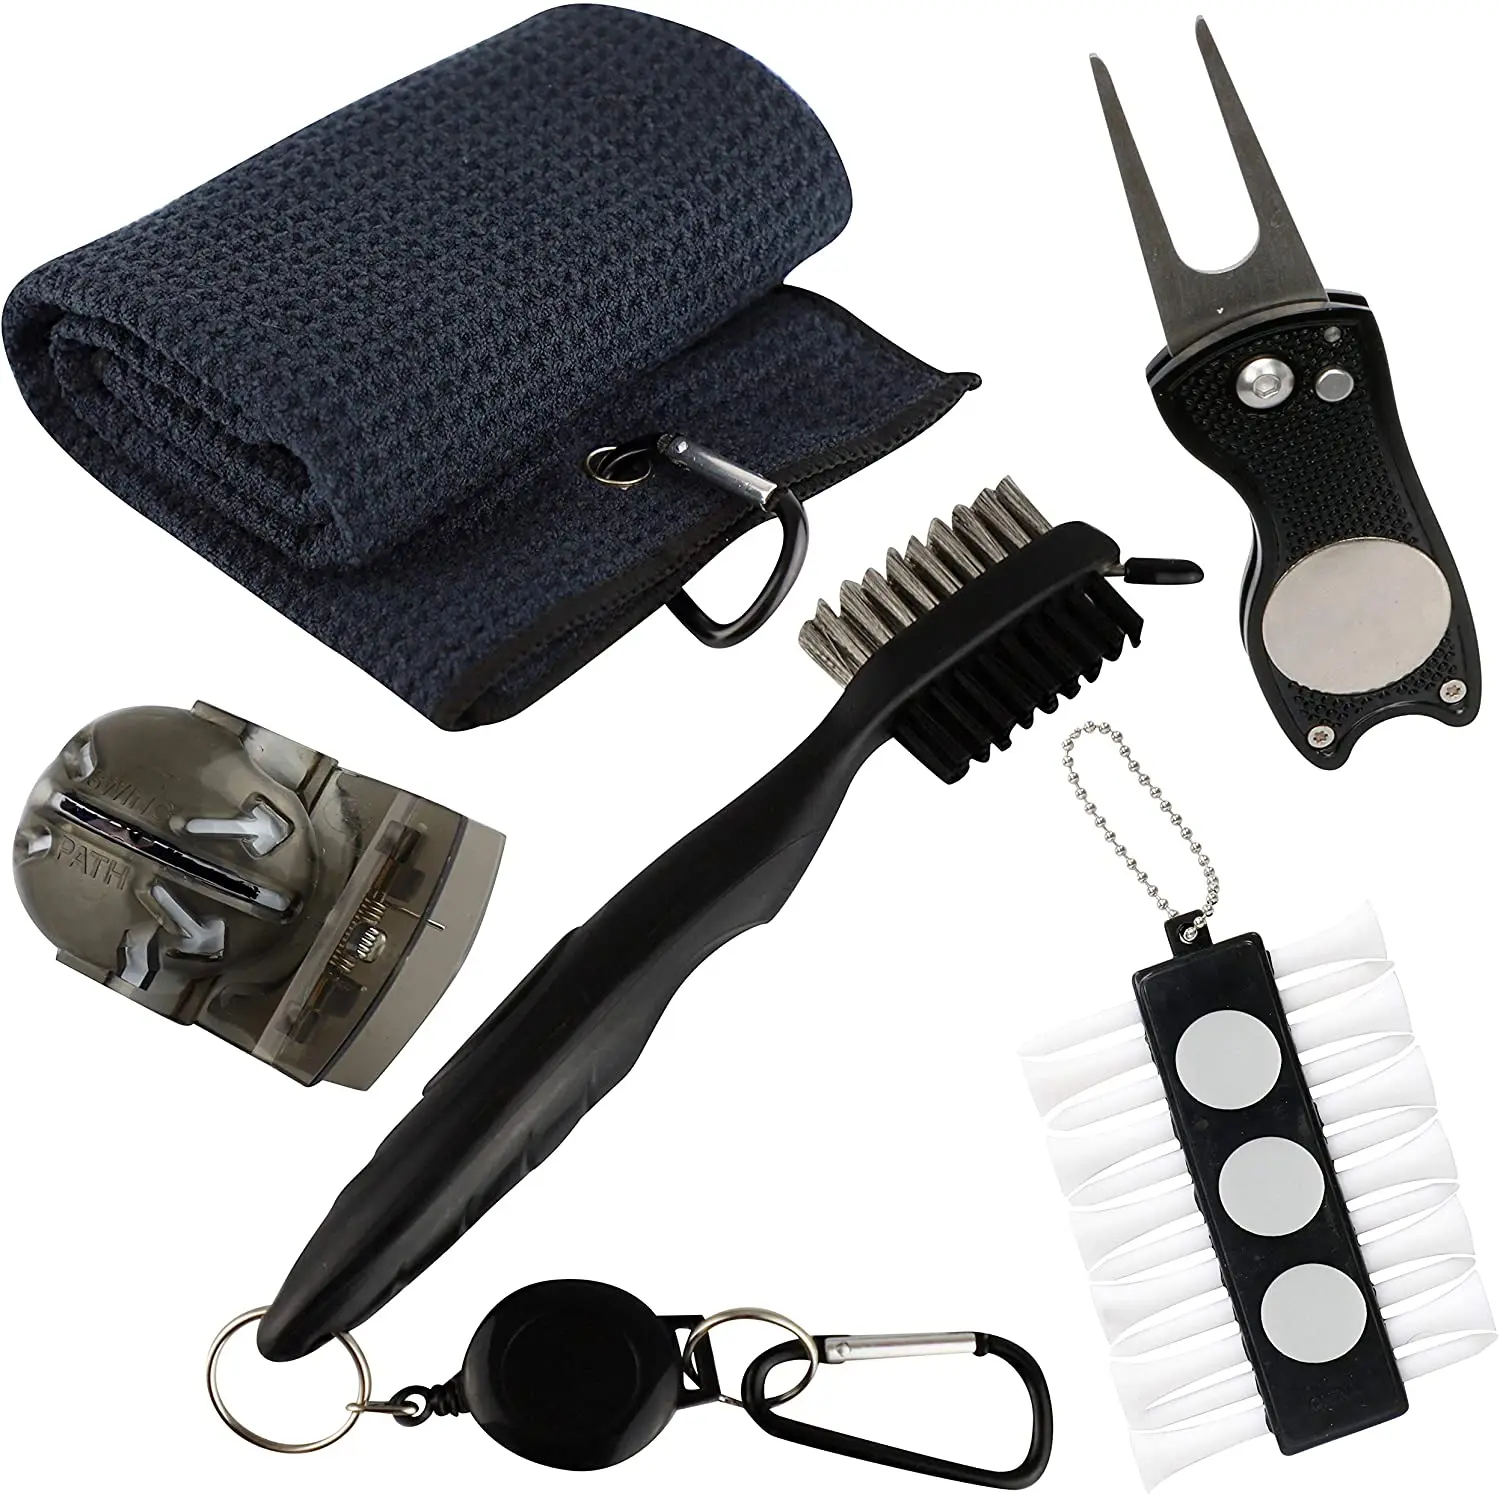 Golf Towel, Golf Club Brush with Groove Cleaner, Foldable Divot Repair Tool with Marker, Golf Tee Holder Training aids